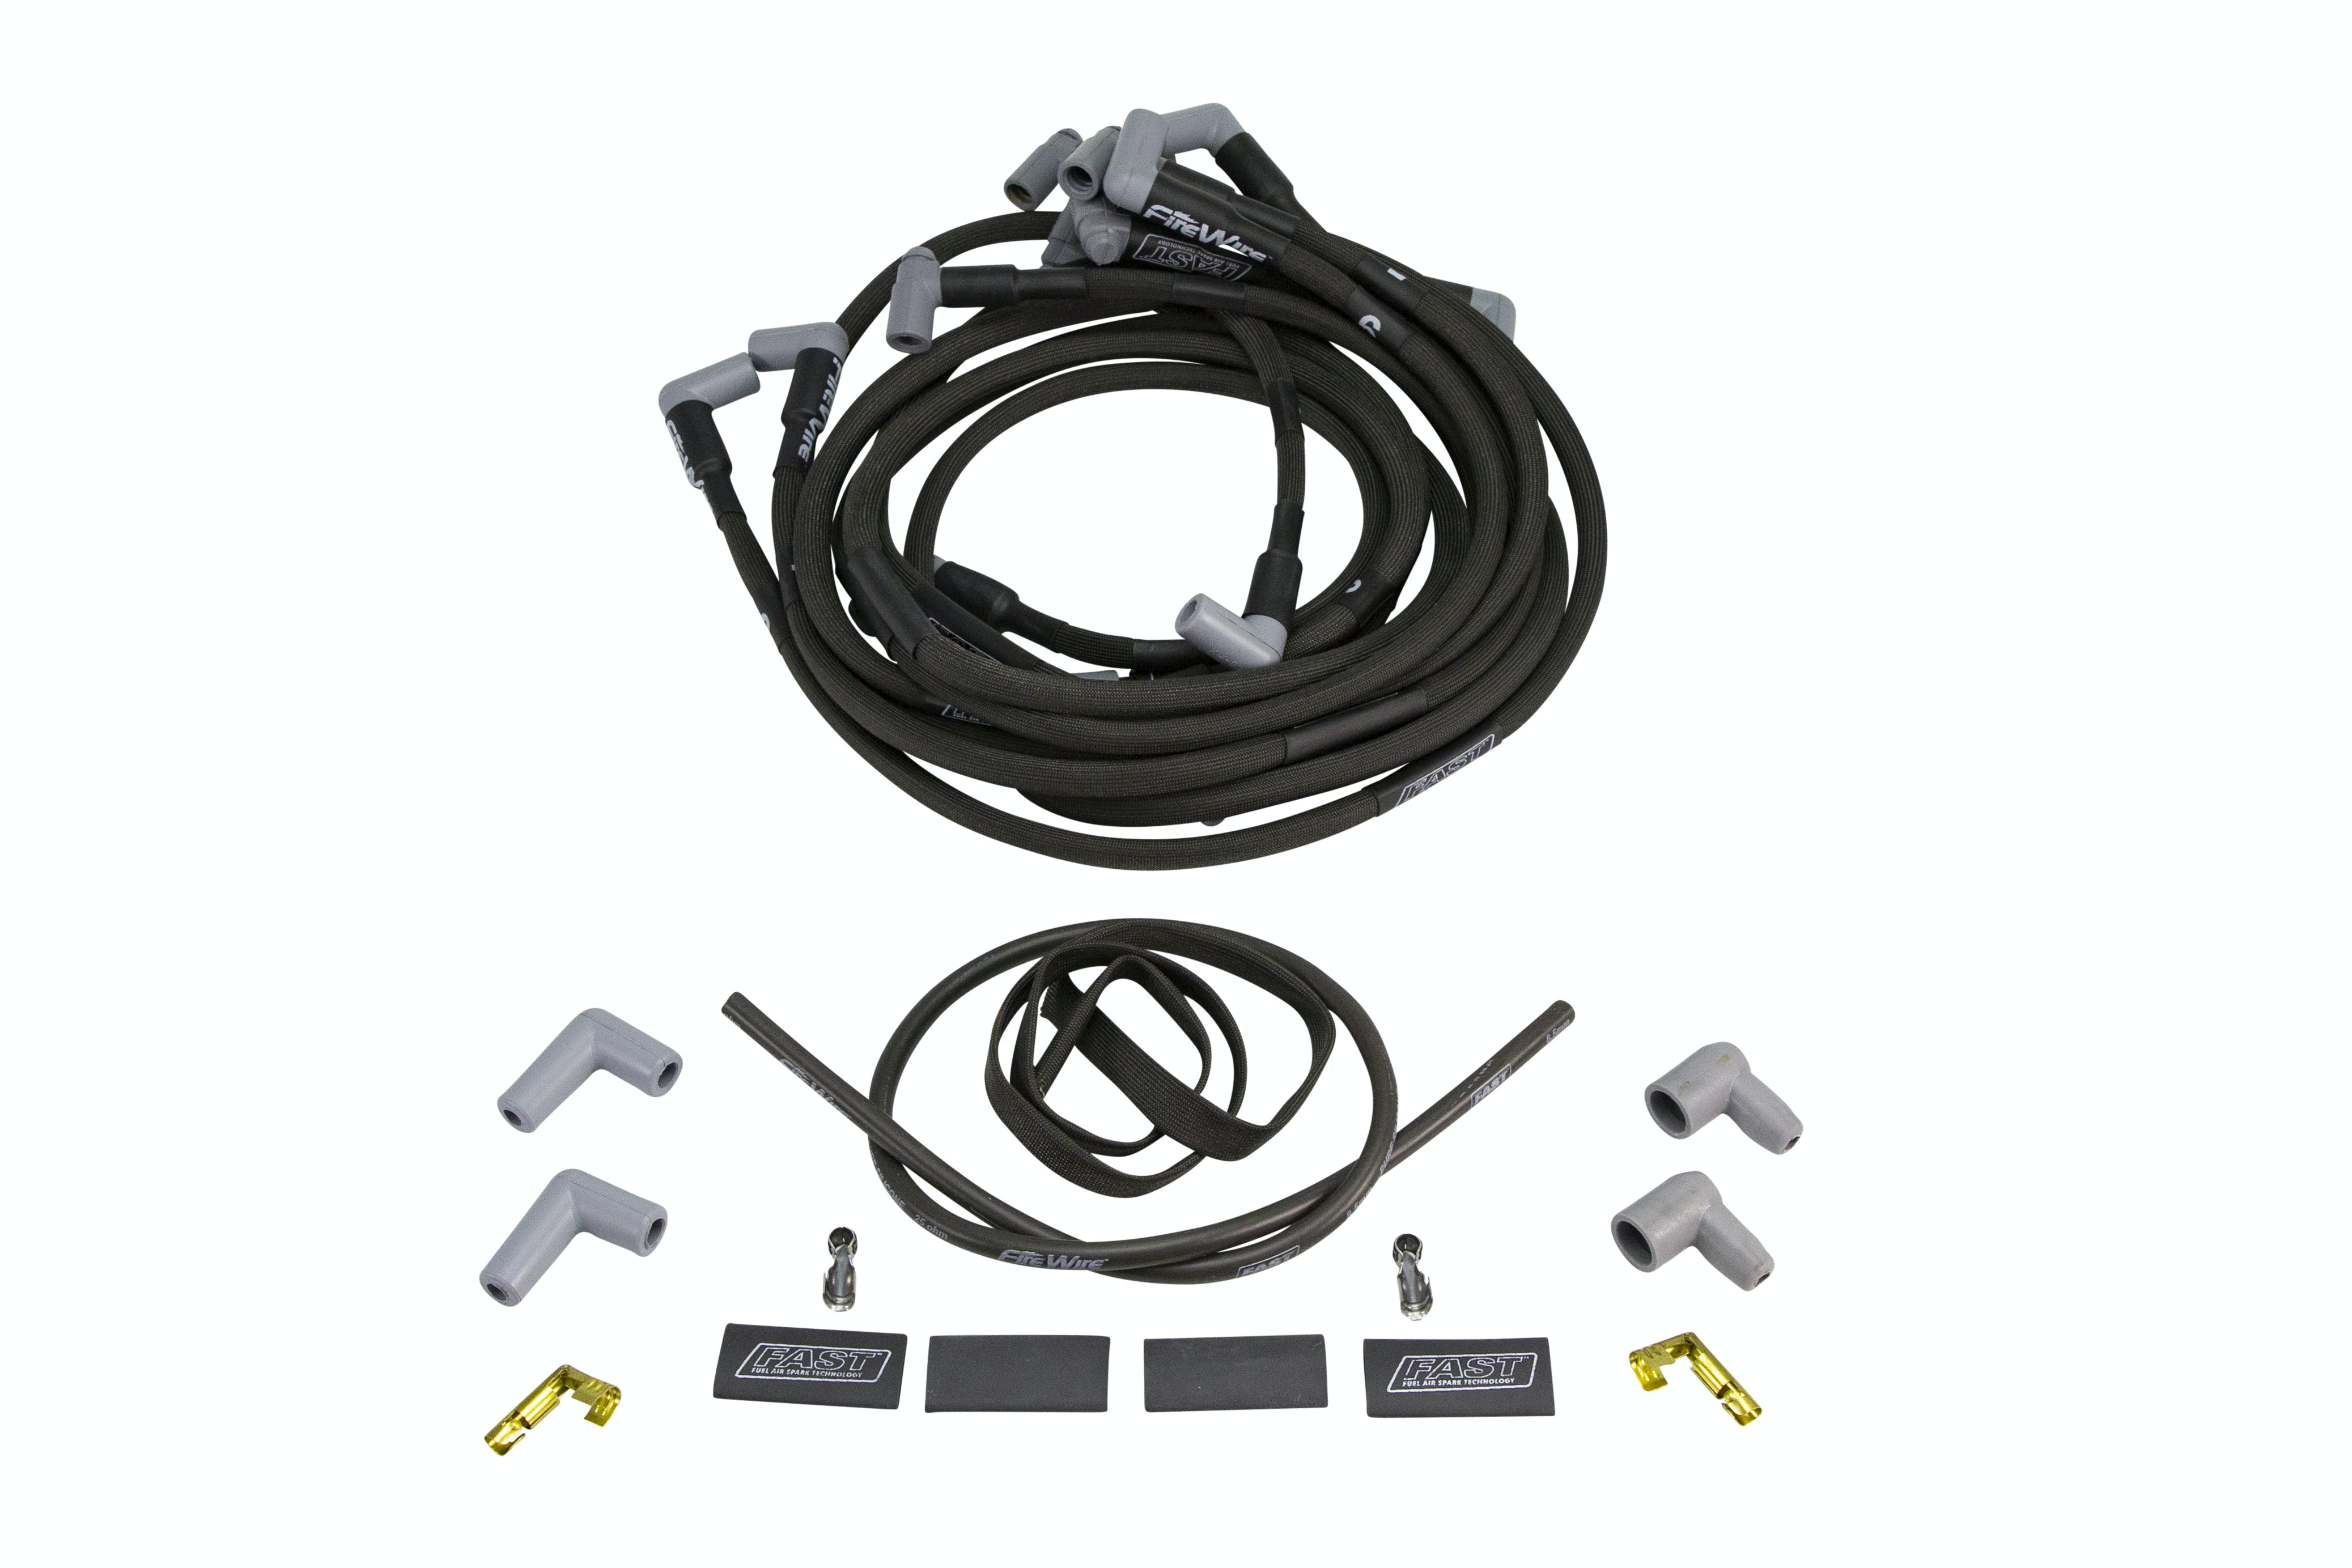 FAST - Fuel Air Spark Technology 295-2416 Big Block Chevrolet Wireset with Heat Sleeve